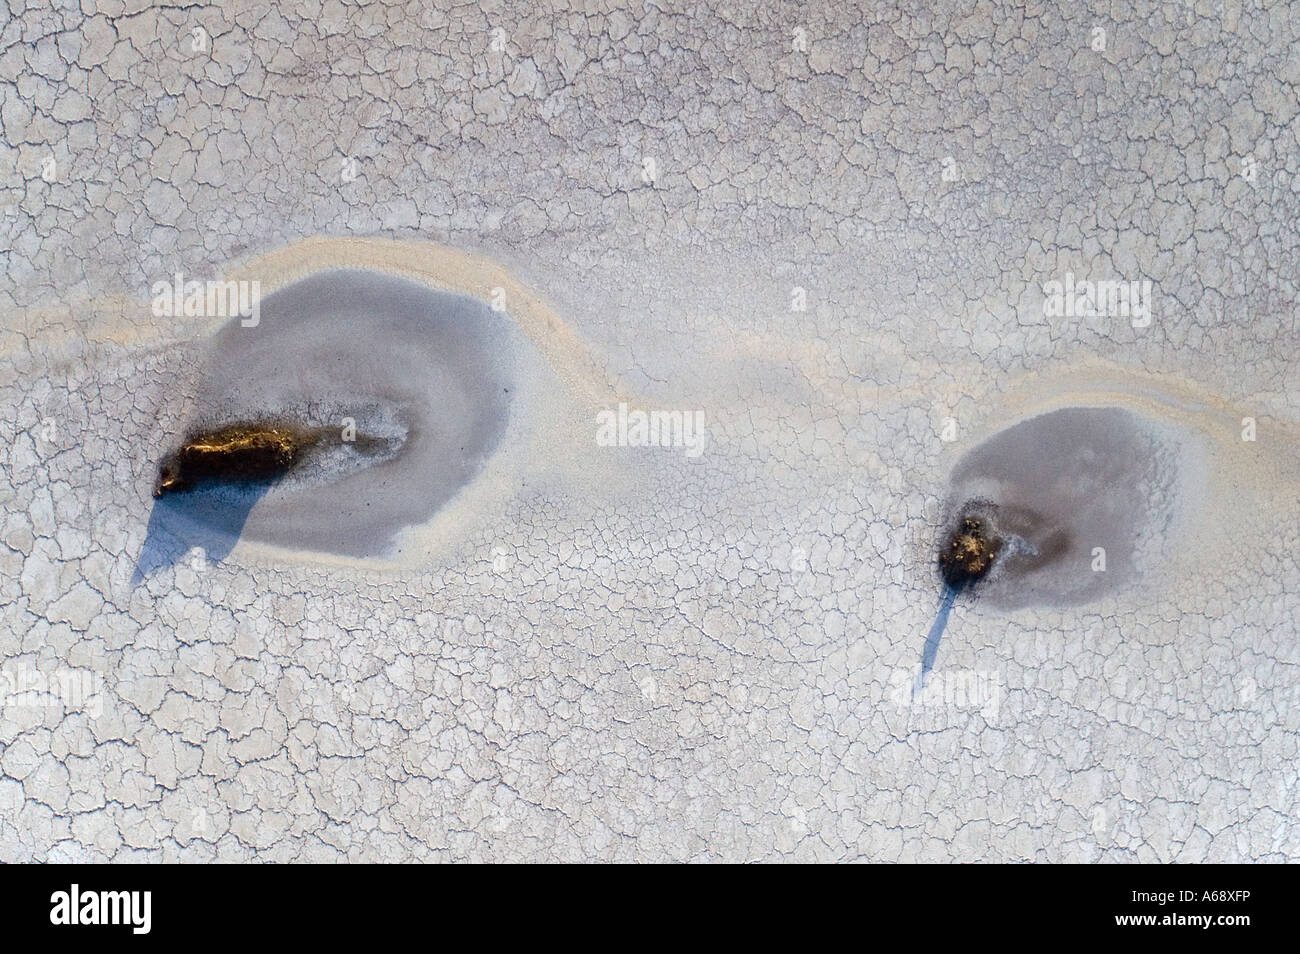 Aerial view of two rocks surrounded by dried salty mud of Lake Natron, Tanzania Stock Photo